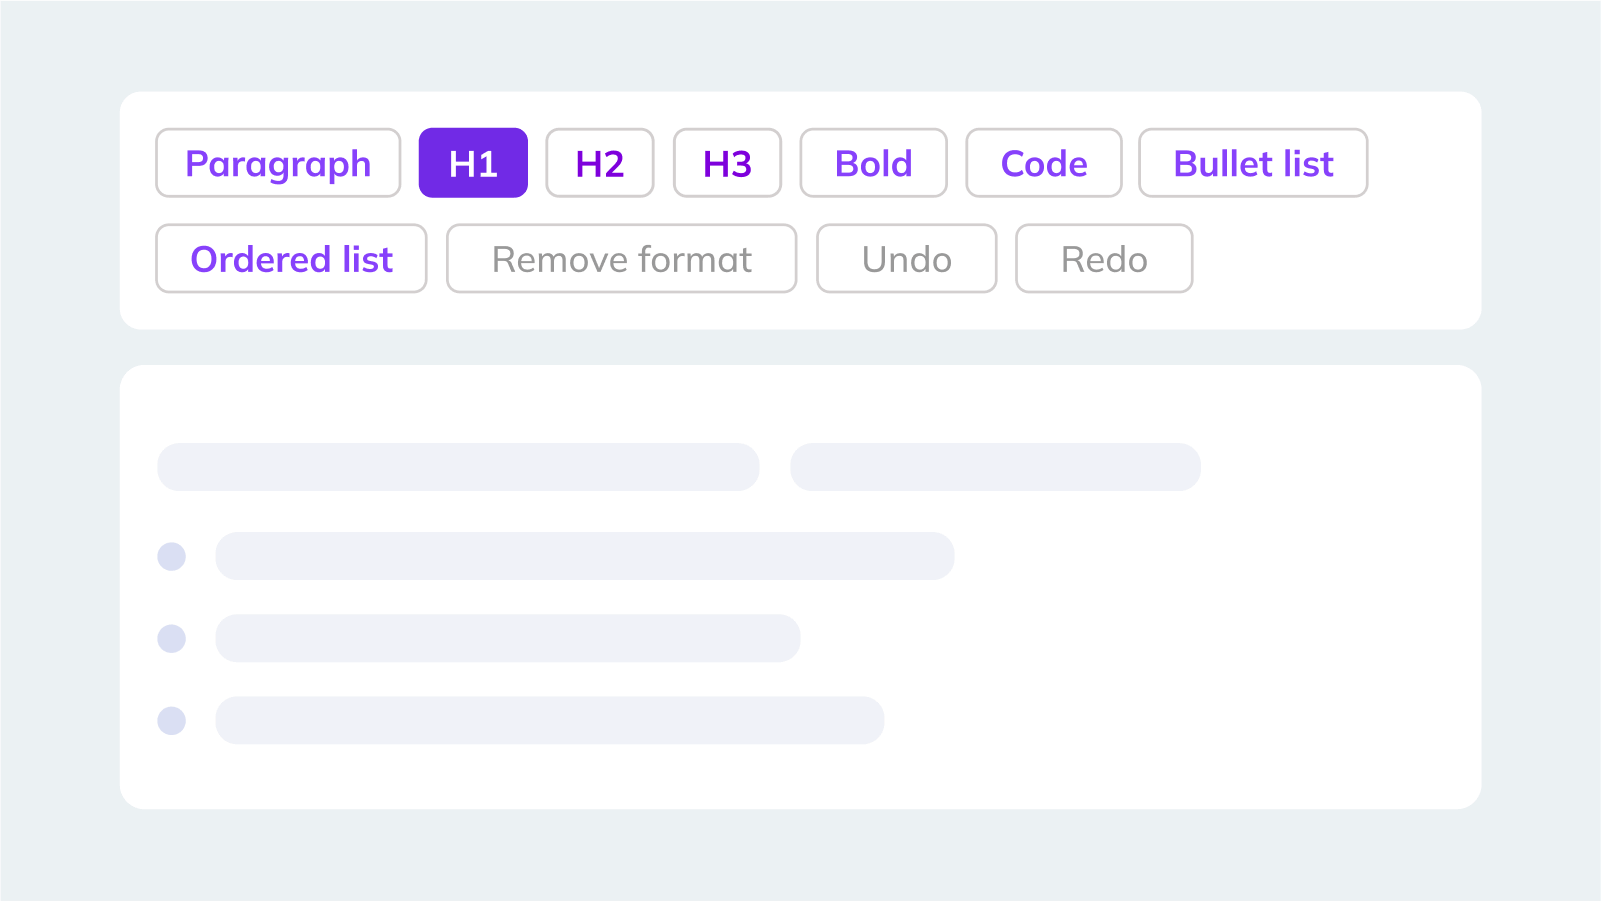 Headless editor demo lets you build your own UI on top of CKEditor 5’s editing engine